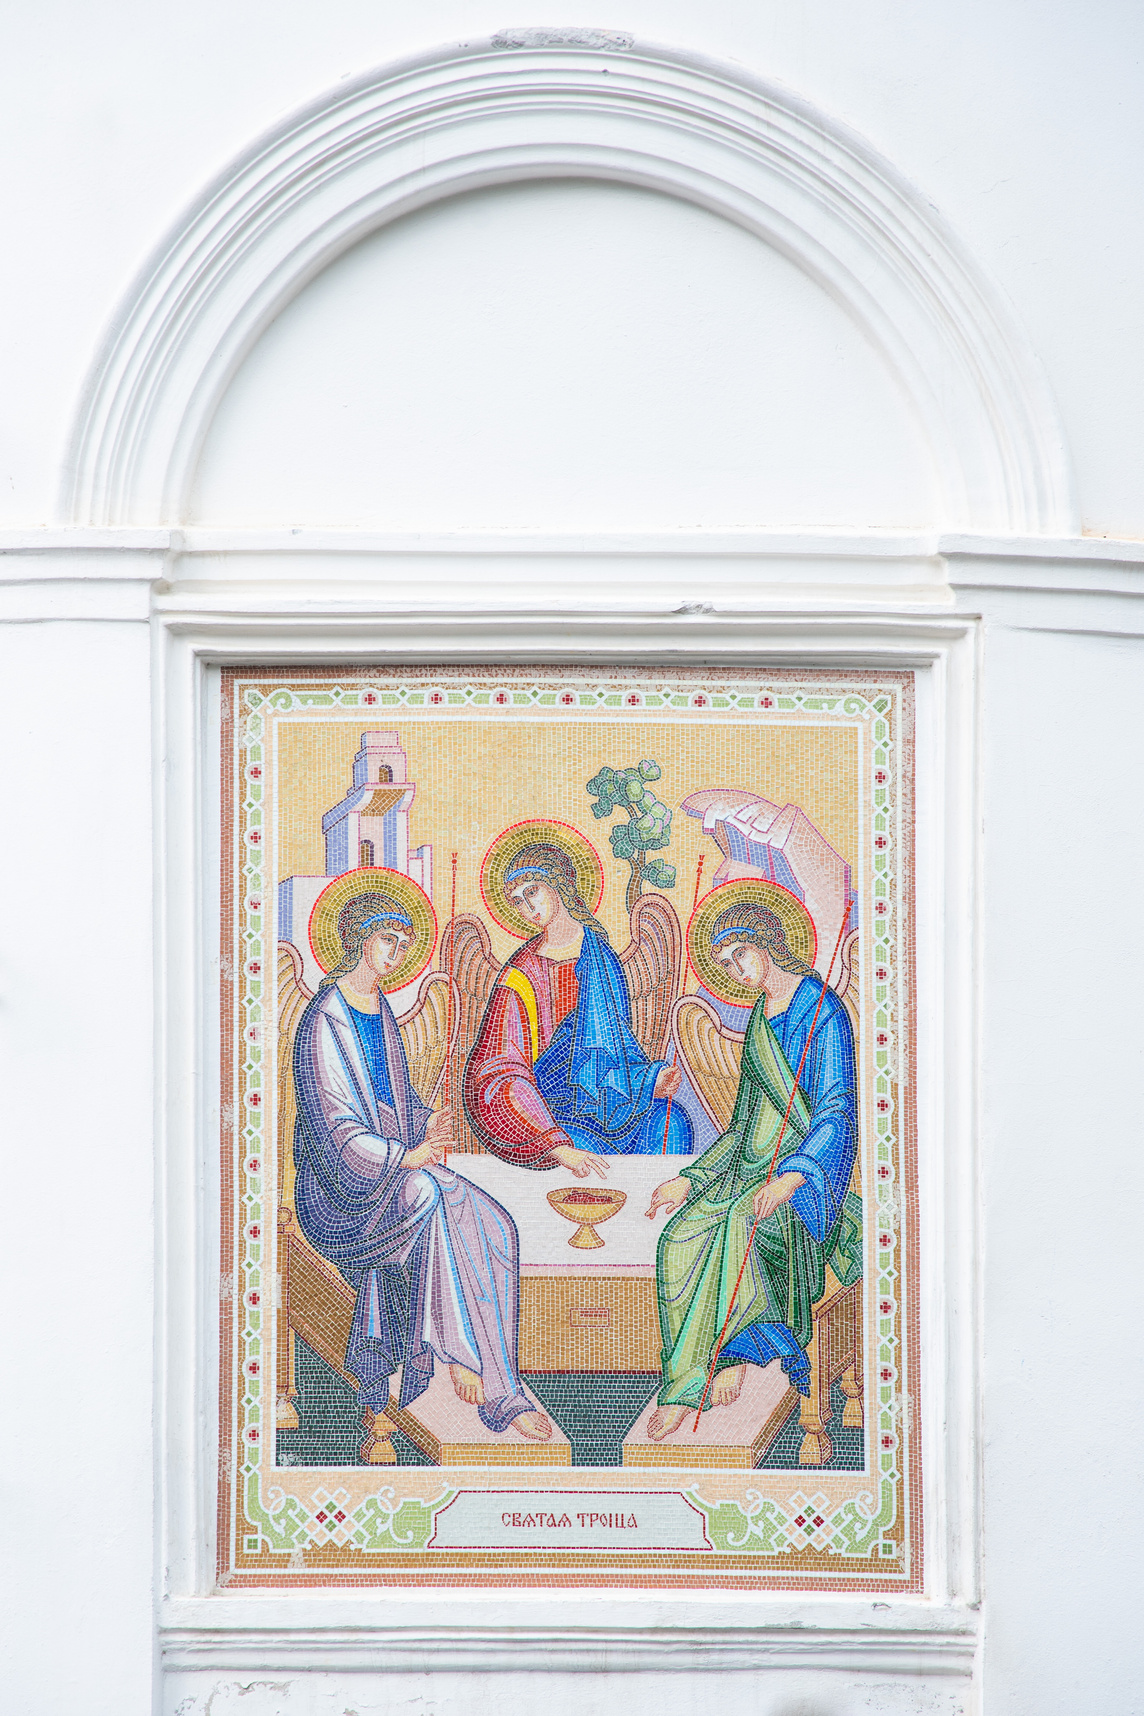 Mosaic of the Holy Trinity on the outside of the Christian Church. Holy Trinity Church in Tomsk, Russia. Translation: "Holy Trinity".